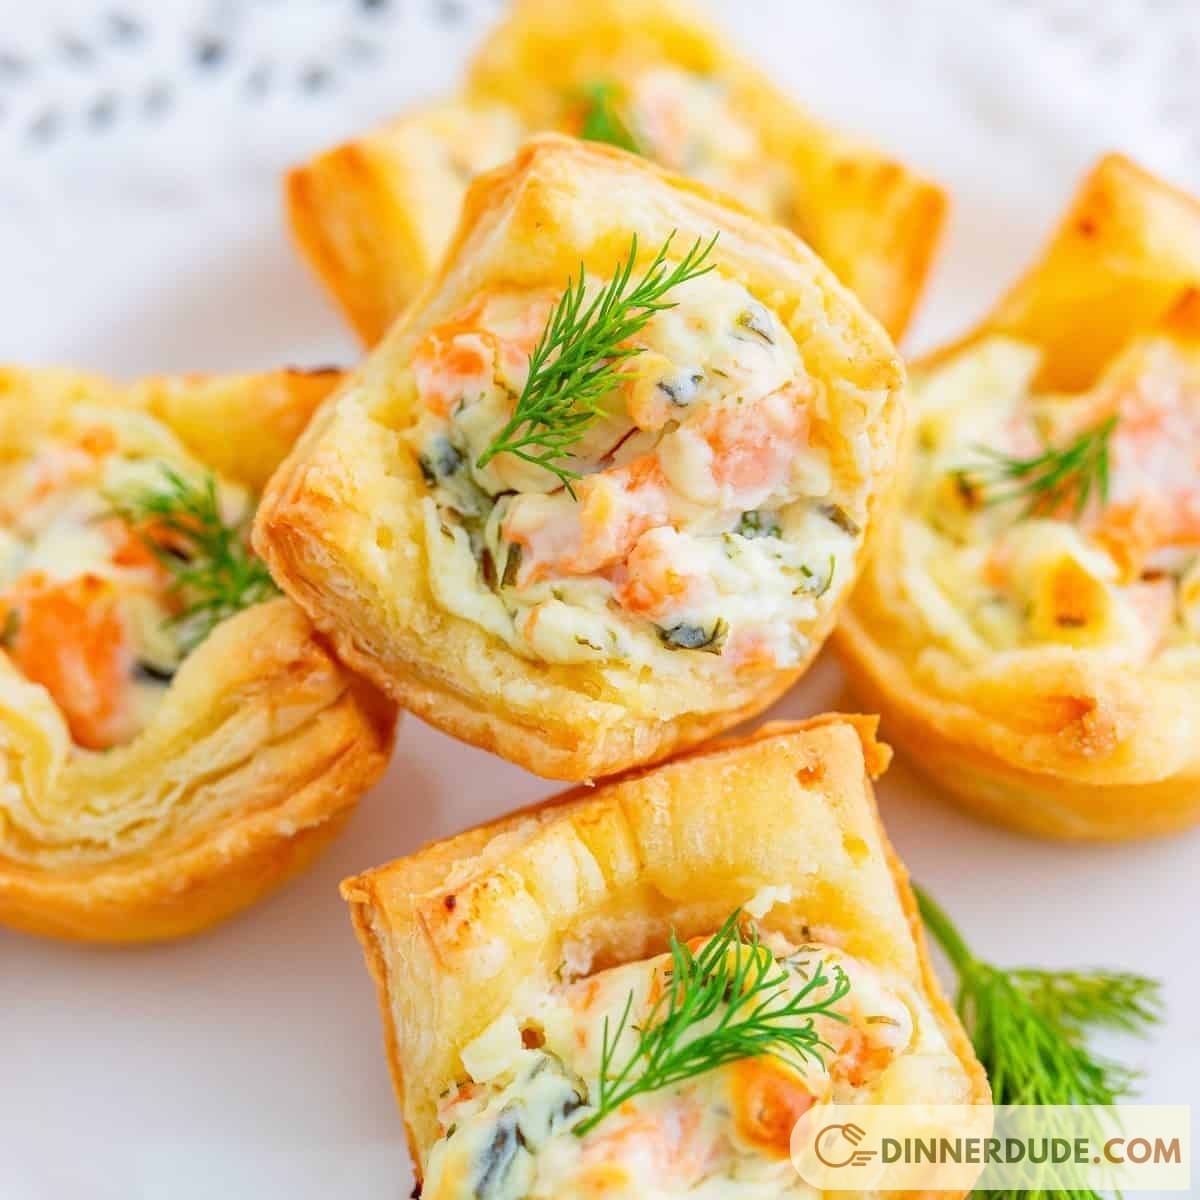 Puff Pastry Basket with Quail Egg